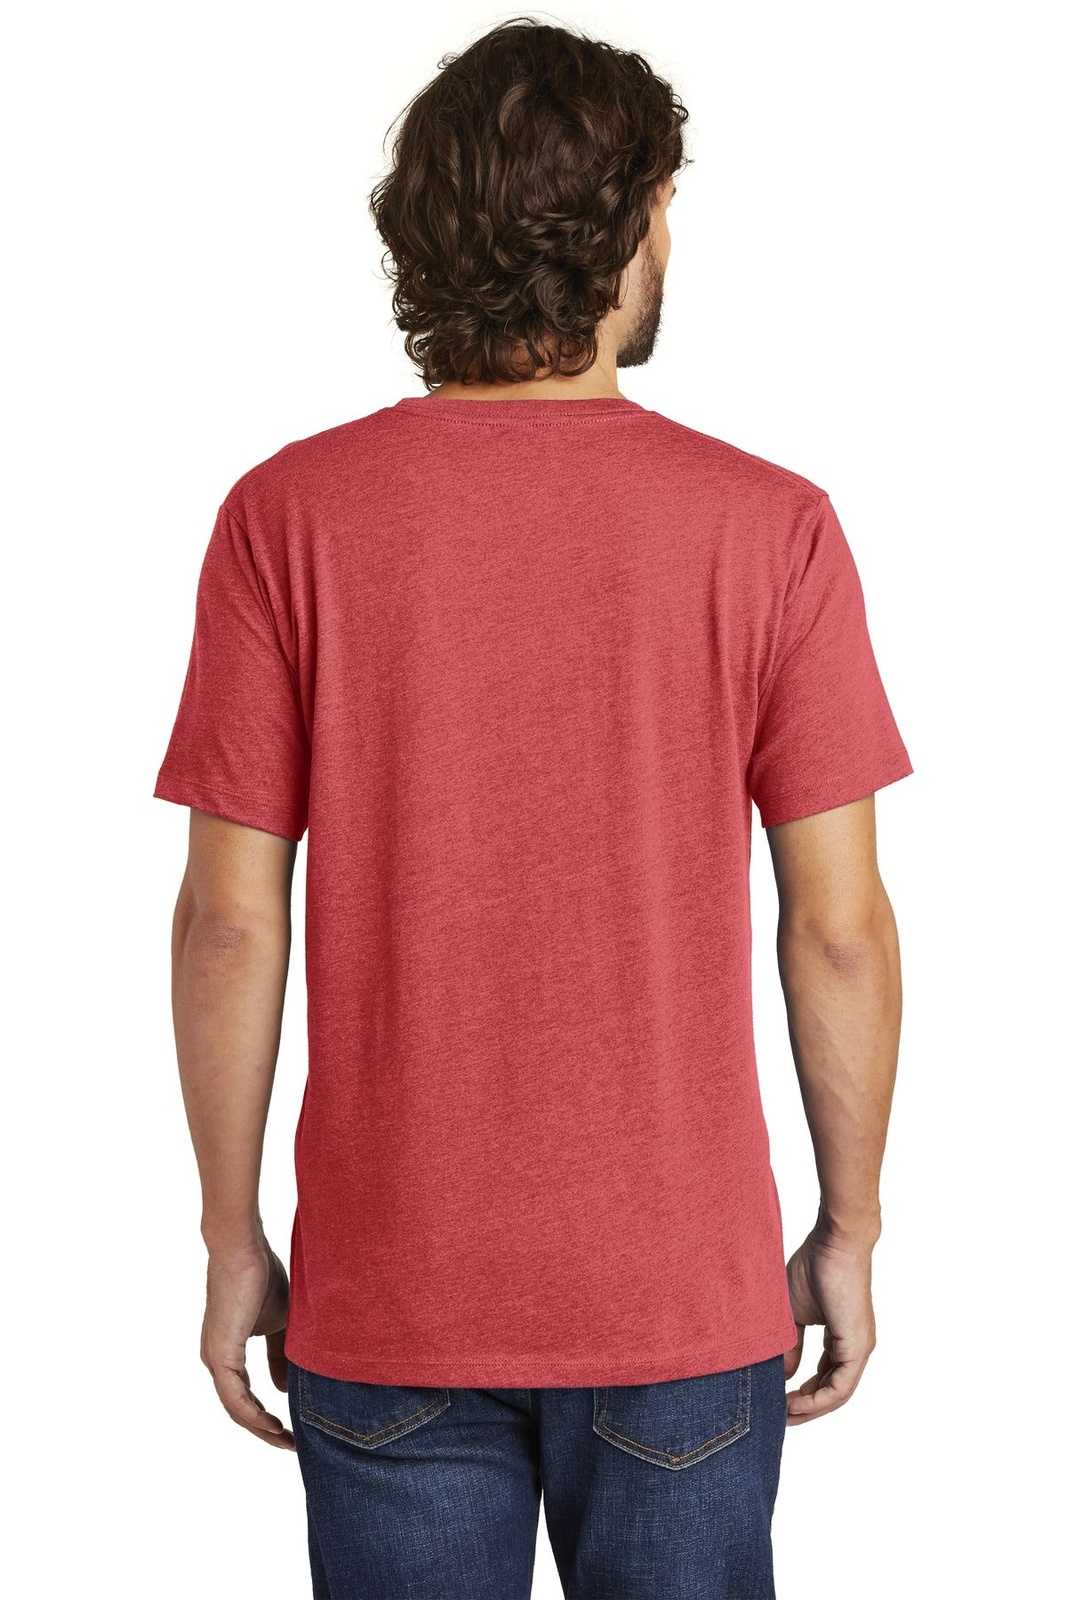 Alternative AA6040 Rebel Blended Jersey Tee - Heather Red - HIT a Double - 1